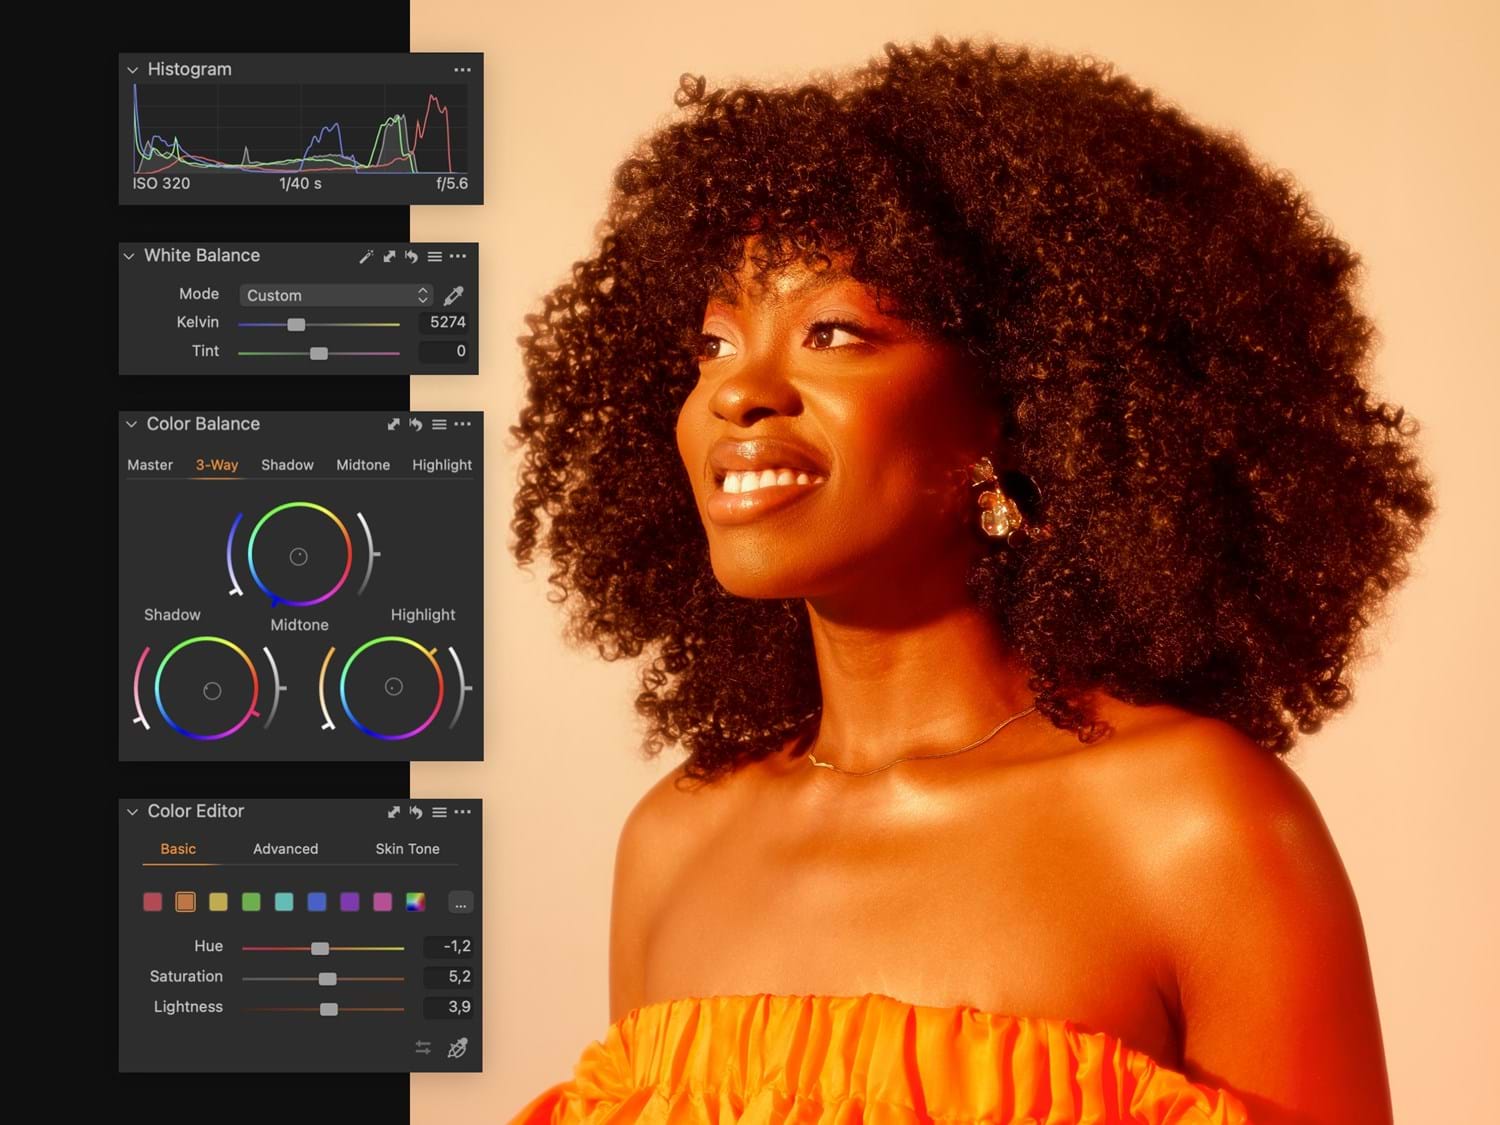 Close-up portrait of a woman next to a series of Capture One editing tools. The portrait emphasizes the need for photos containing faces to apply Smart Adjustments' automated photo editing functionality. 